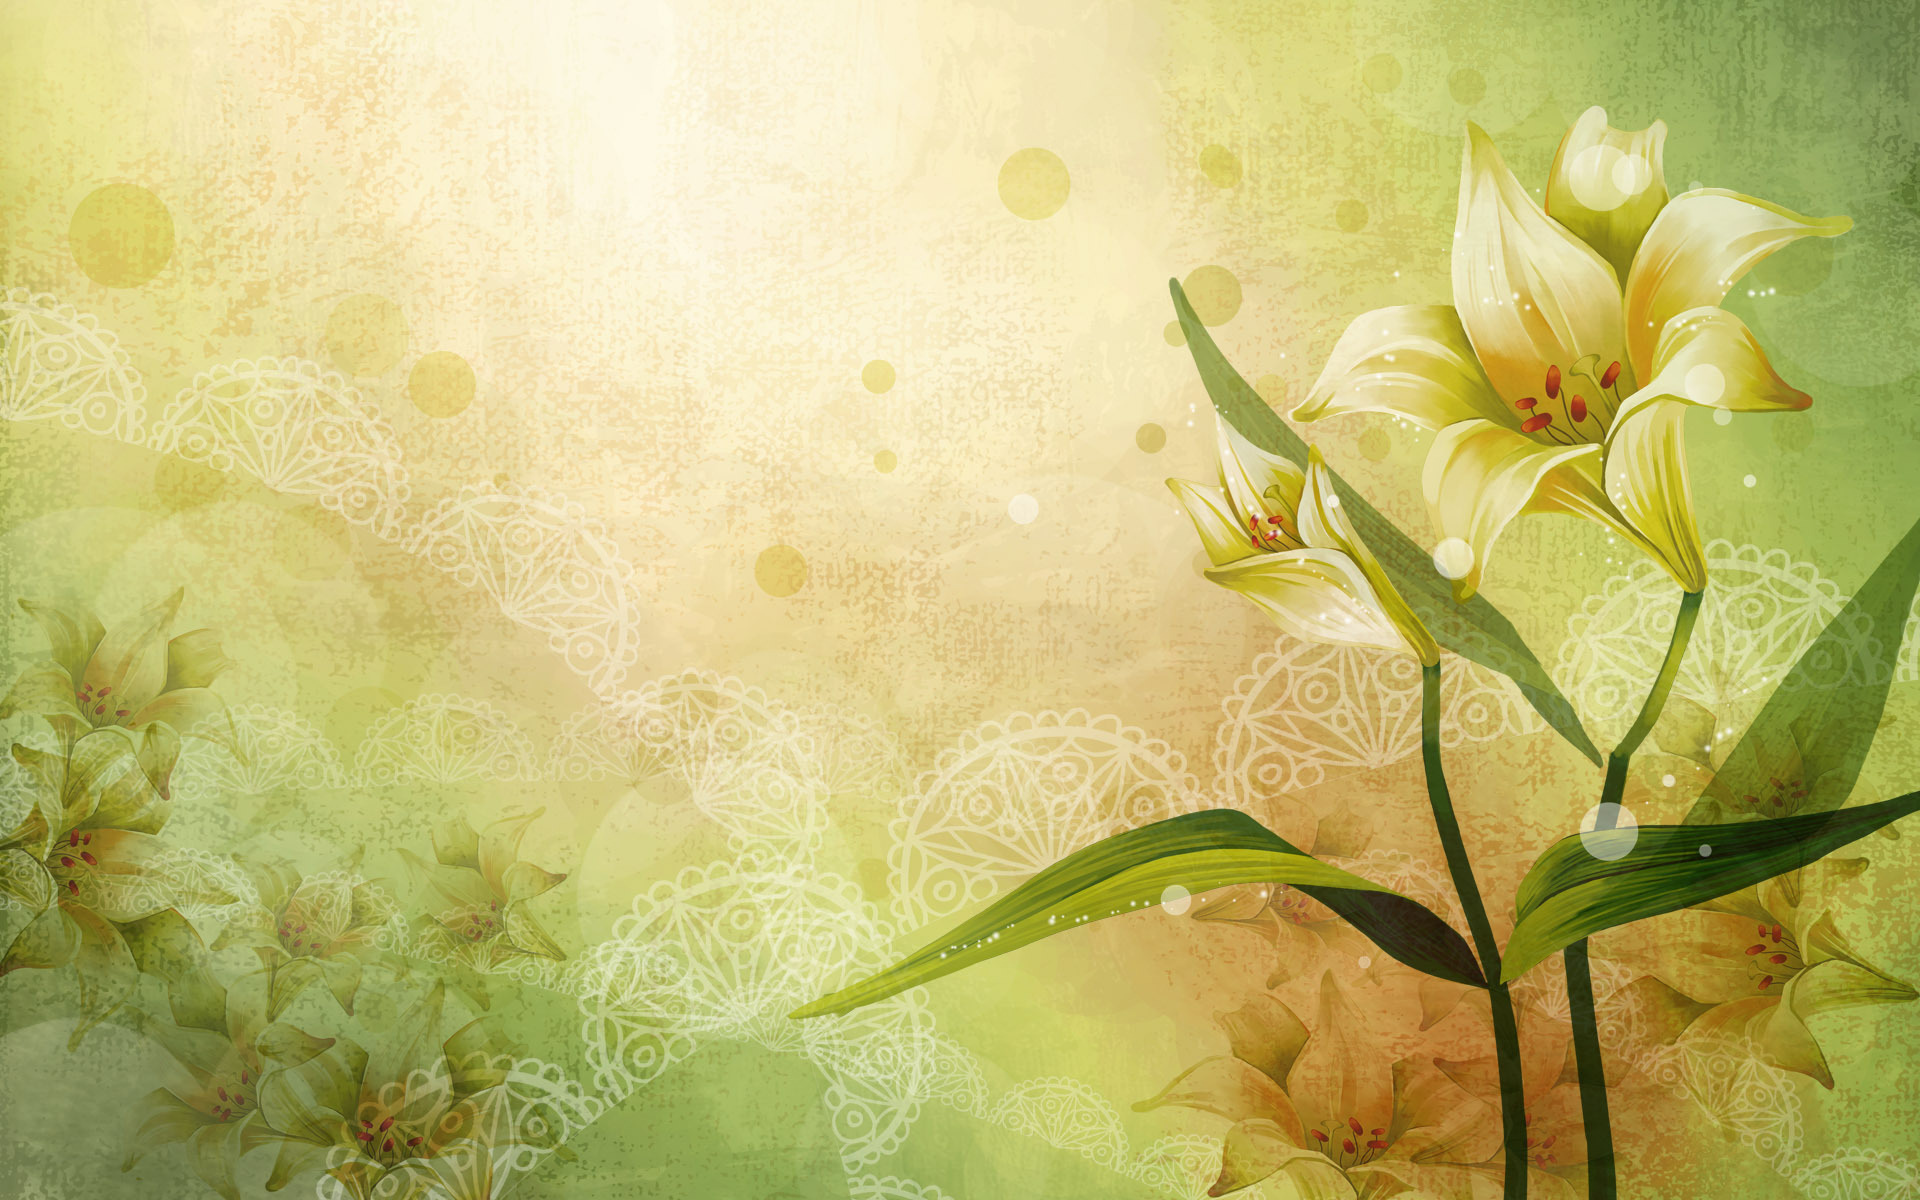 background, plants, flowers, yellow Image for desktop